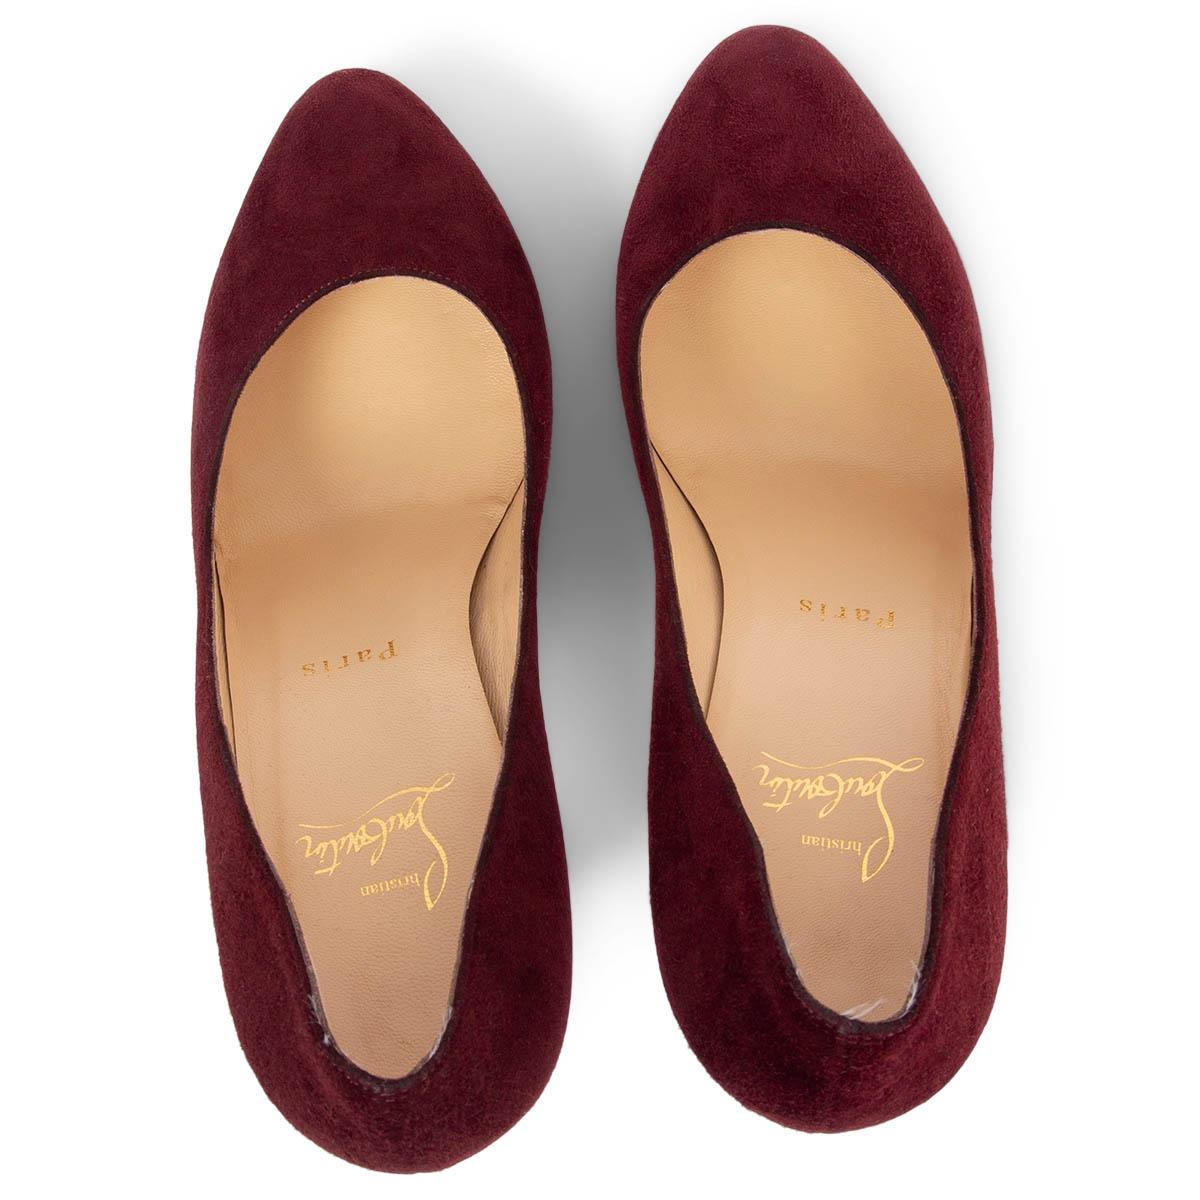 CHRISTIAN LOUBOUTIN burgundy suede SIMPLE 100 Pumps Shoes 38.5 For Sale 1